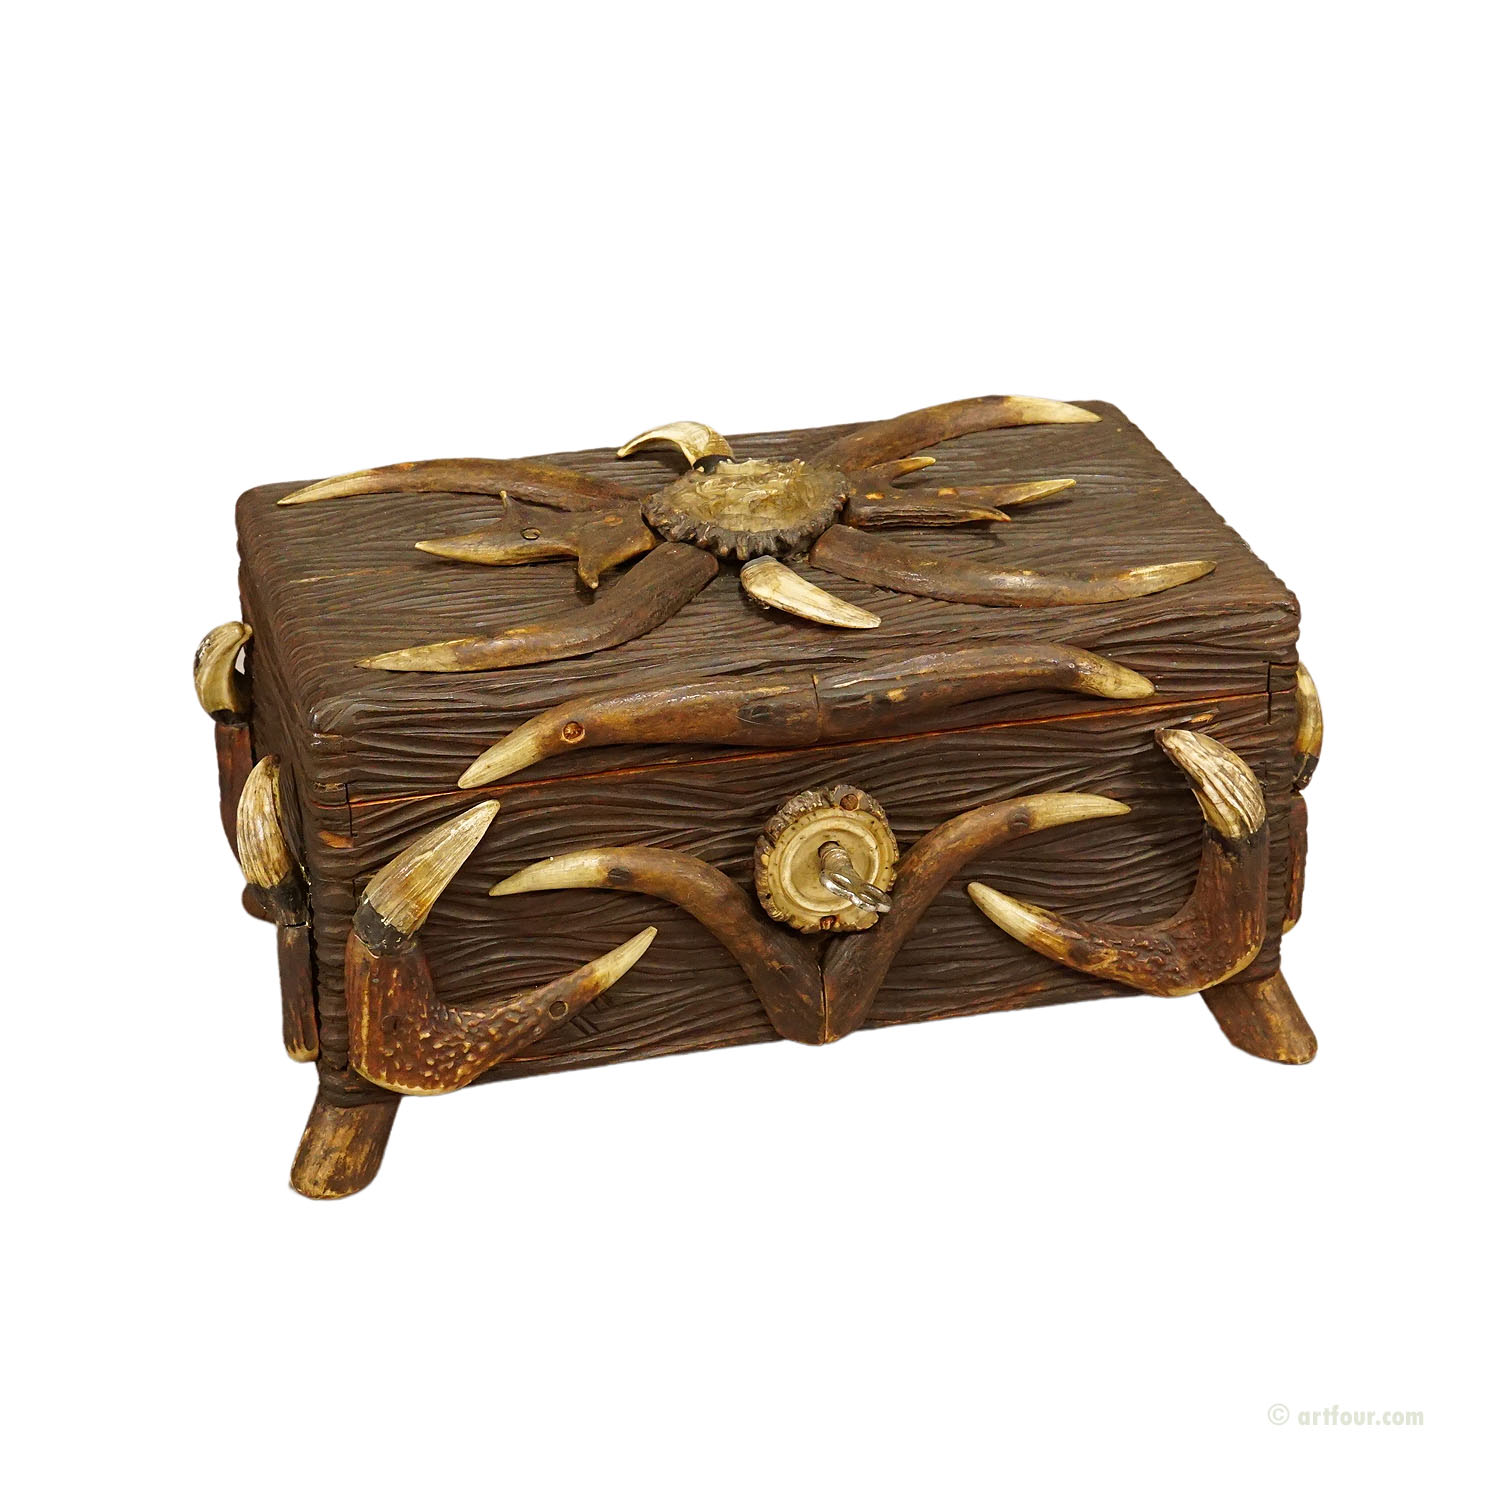 Black Forest Wooden Casket with Antlers Decoration circa 1900s